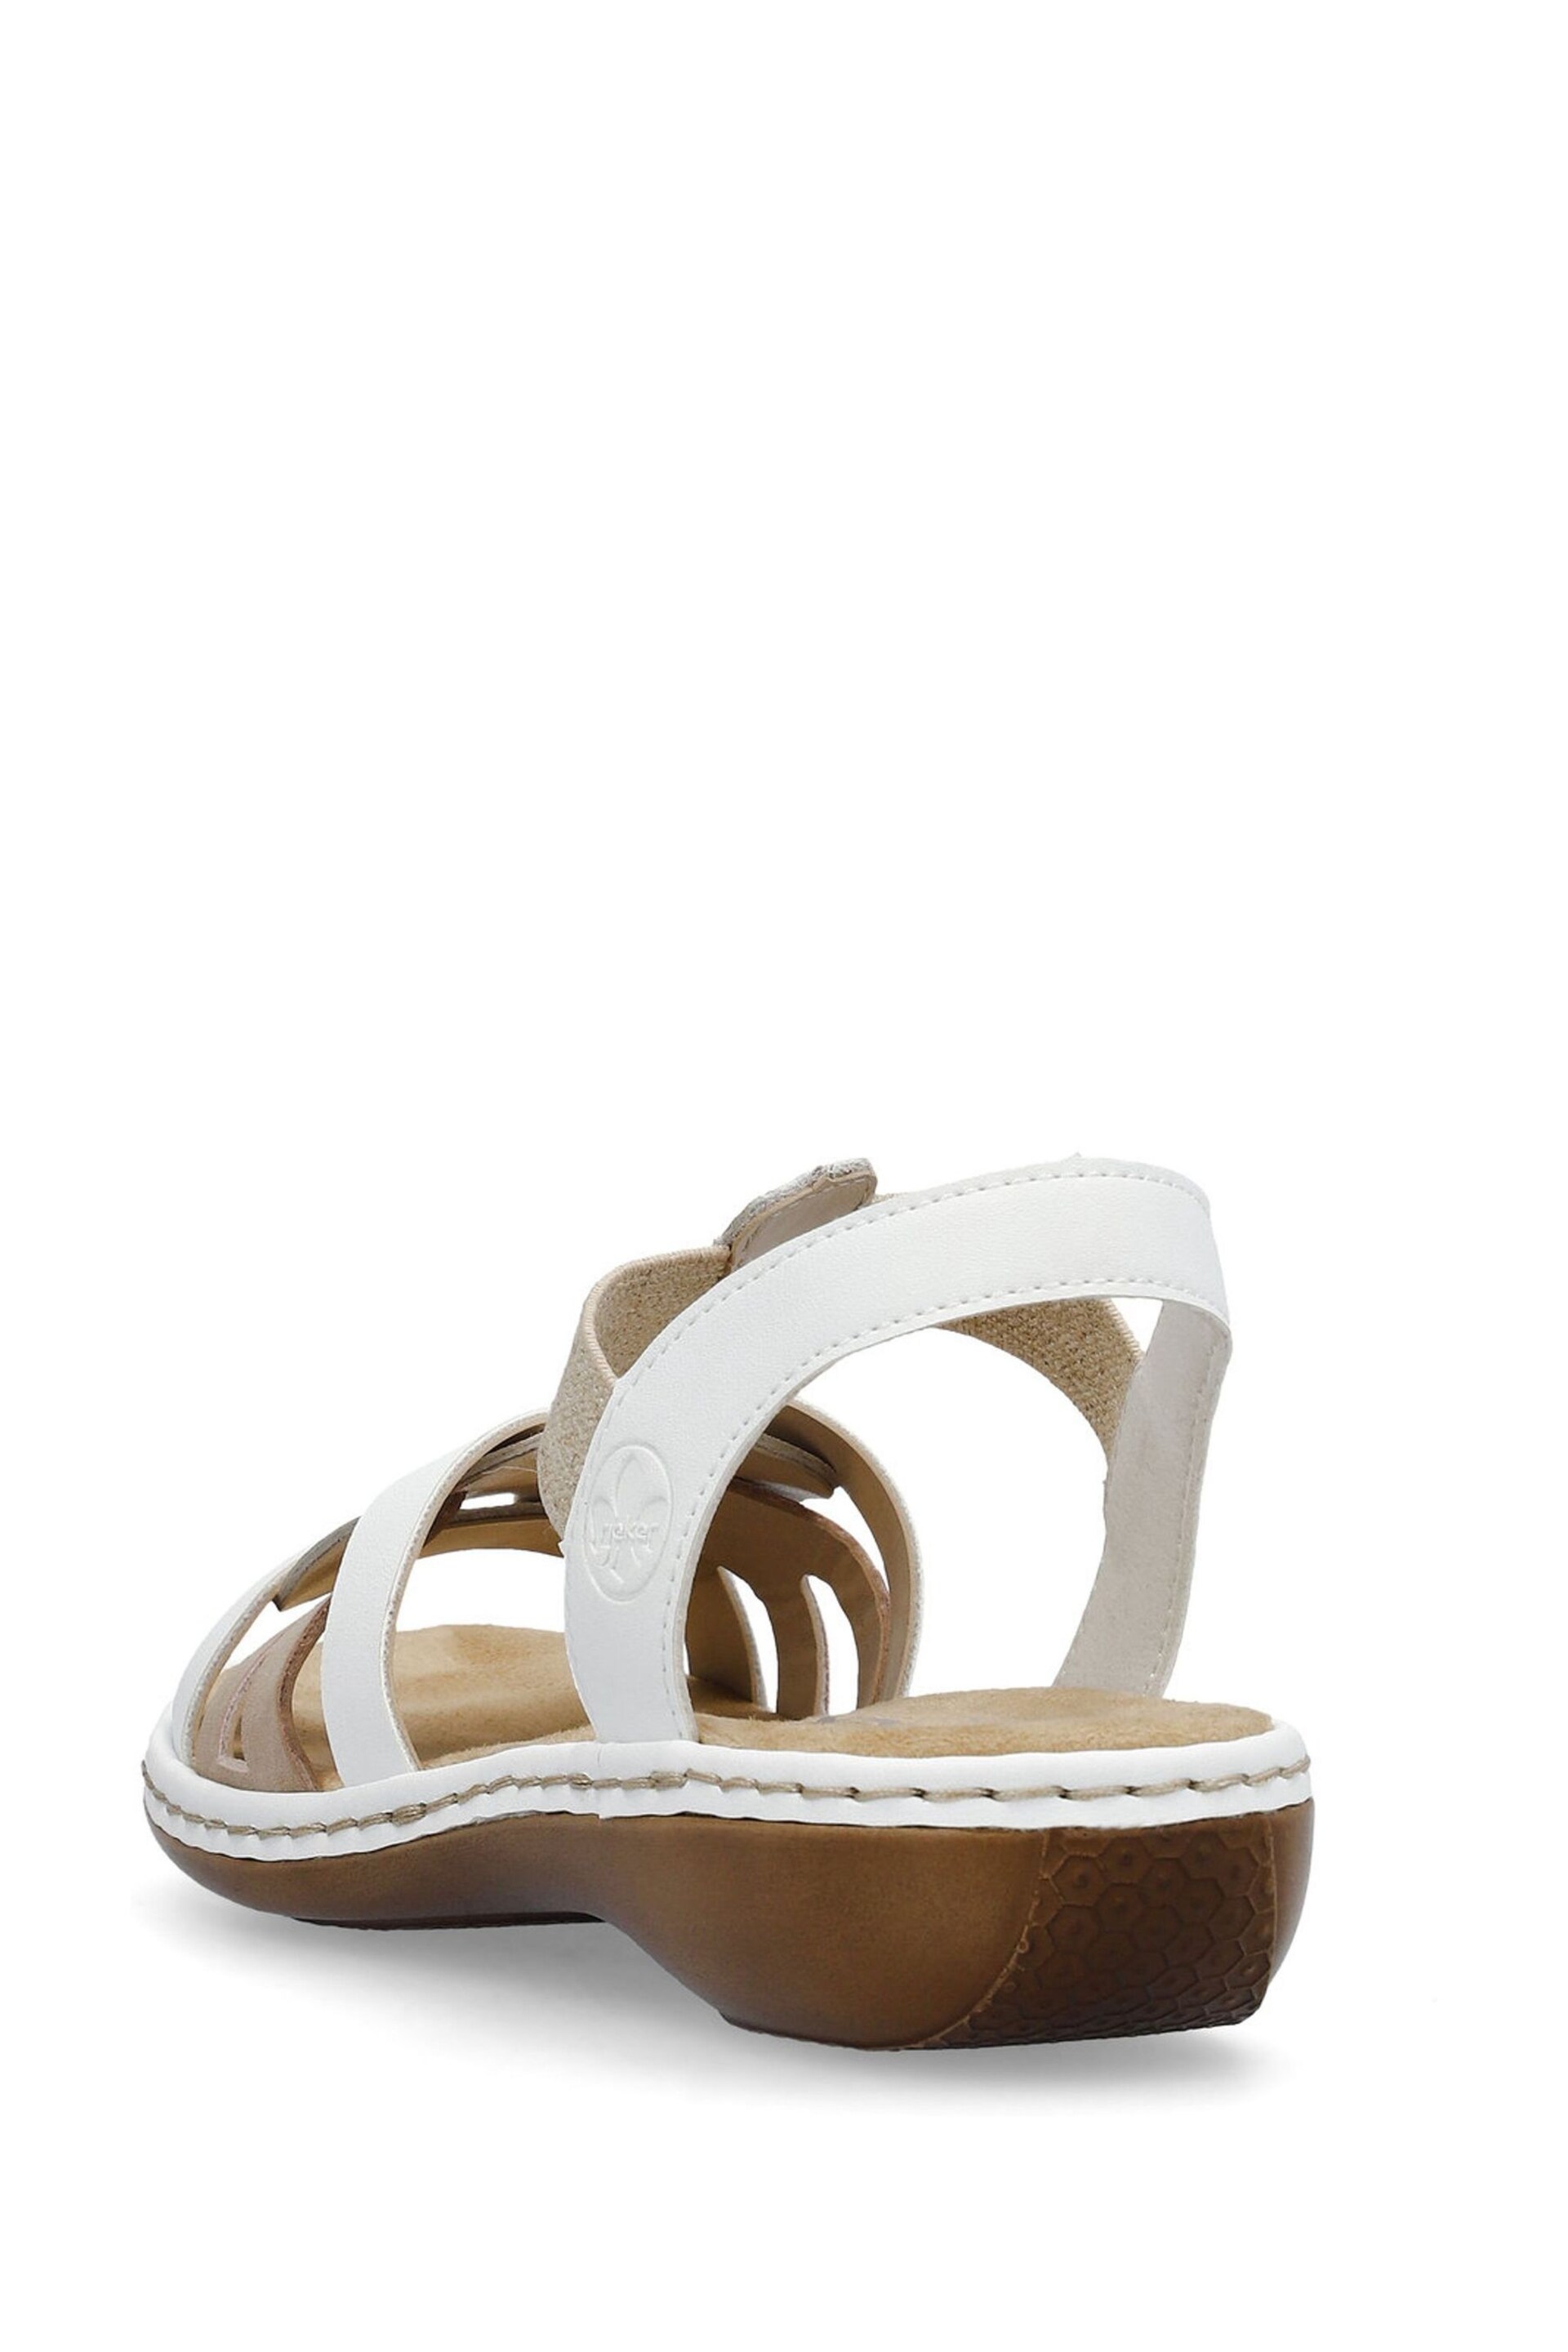 Rieker Womens Elastic Stretch Sandals - Image 6 of 9